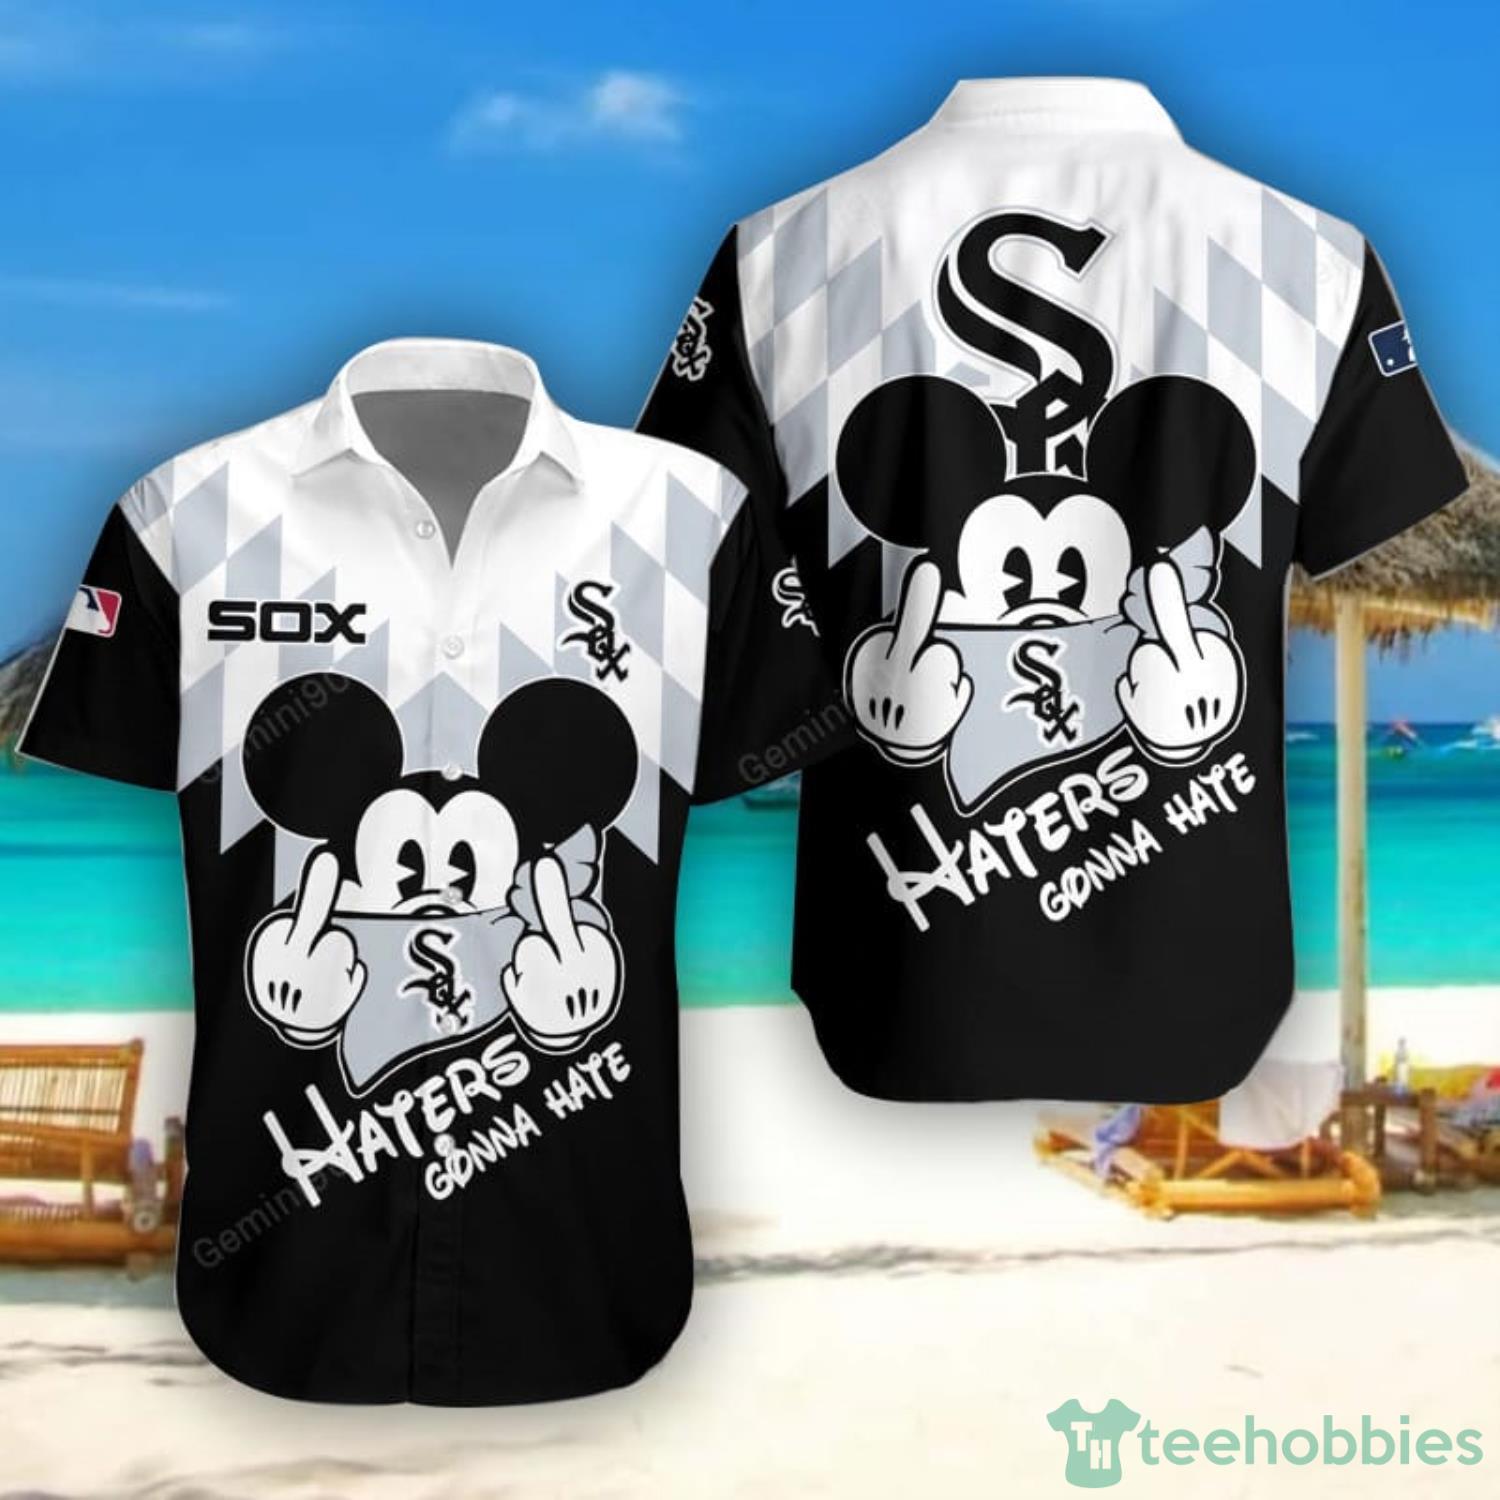 White Sox Hawaiian Shirt Big Hibiscus Pattern Chicago White Sox Gift -  Personalized Gifts: Family, Sports, Occasions, Trending